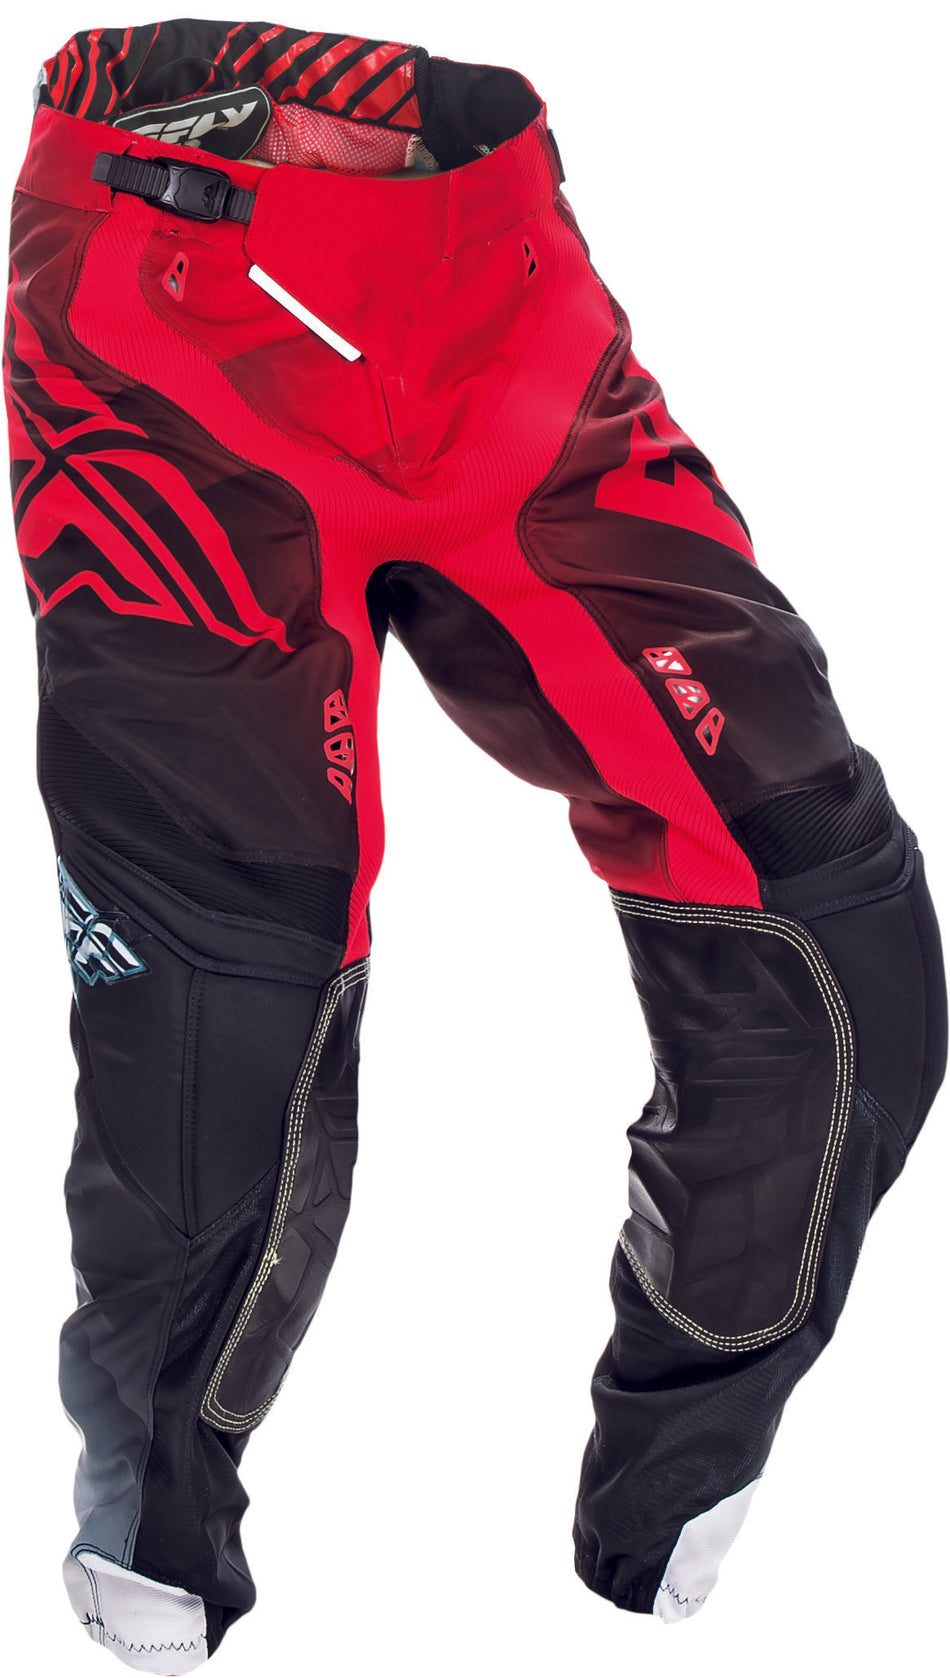 FLY RACING Lite Hydrogen Pant Red/Black/White Sz 28 370-73228